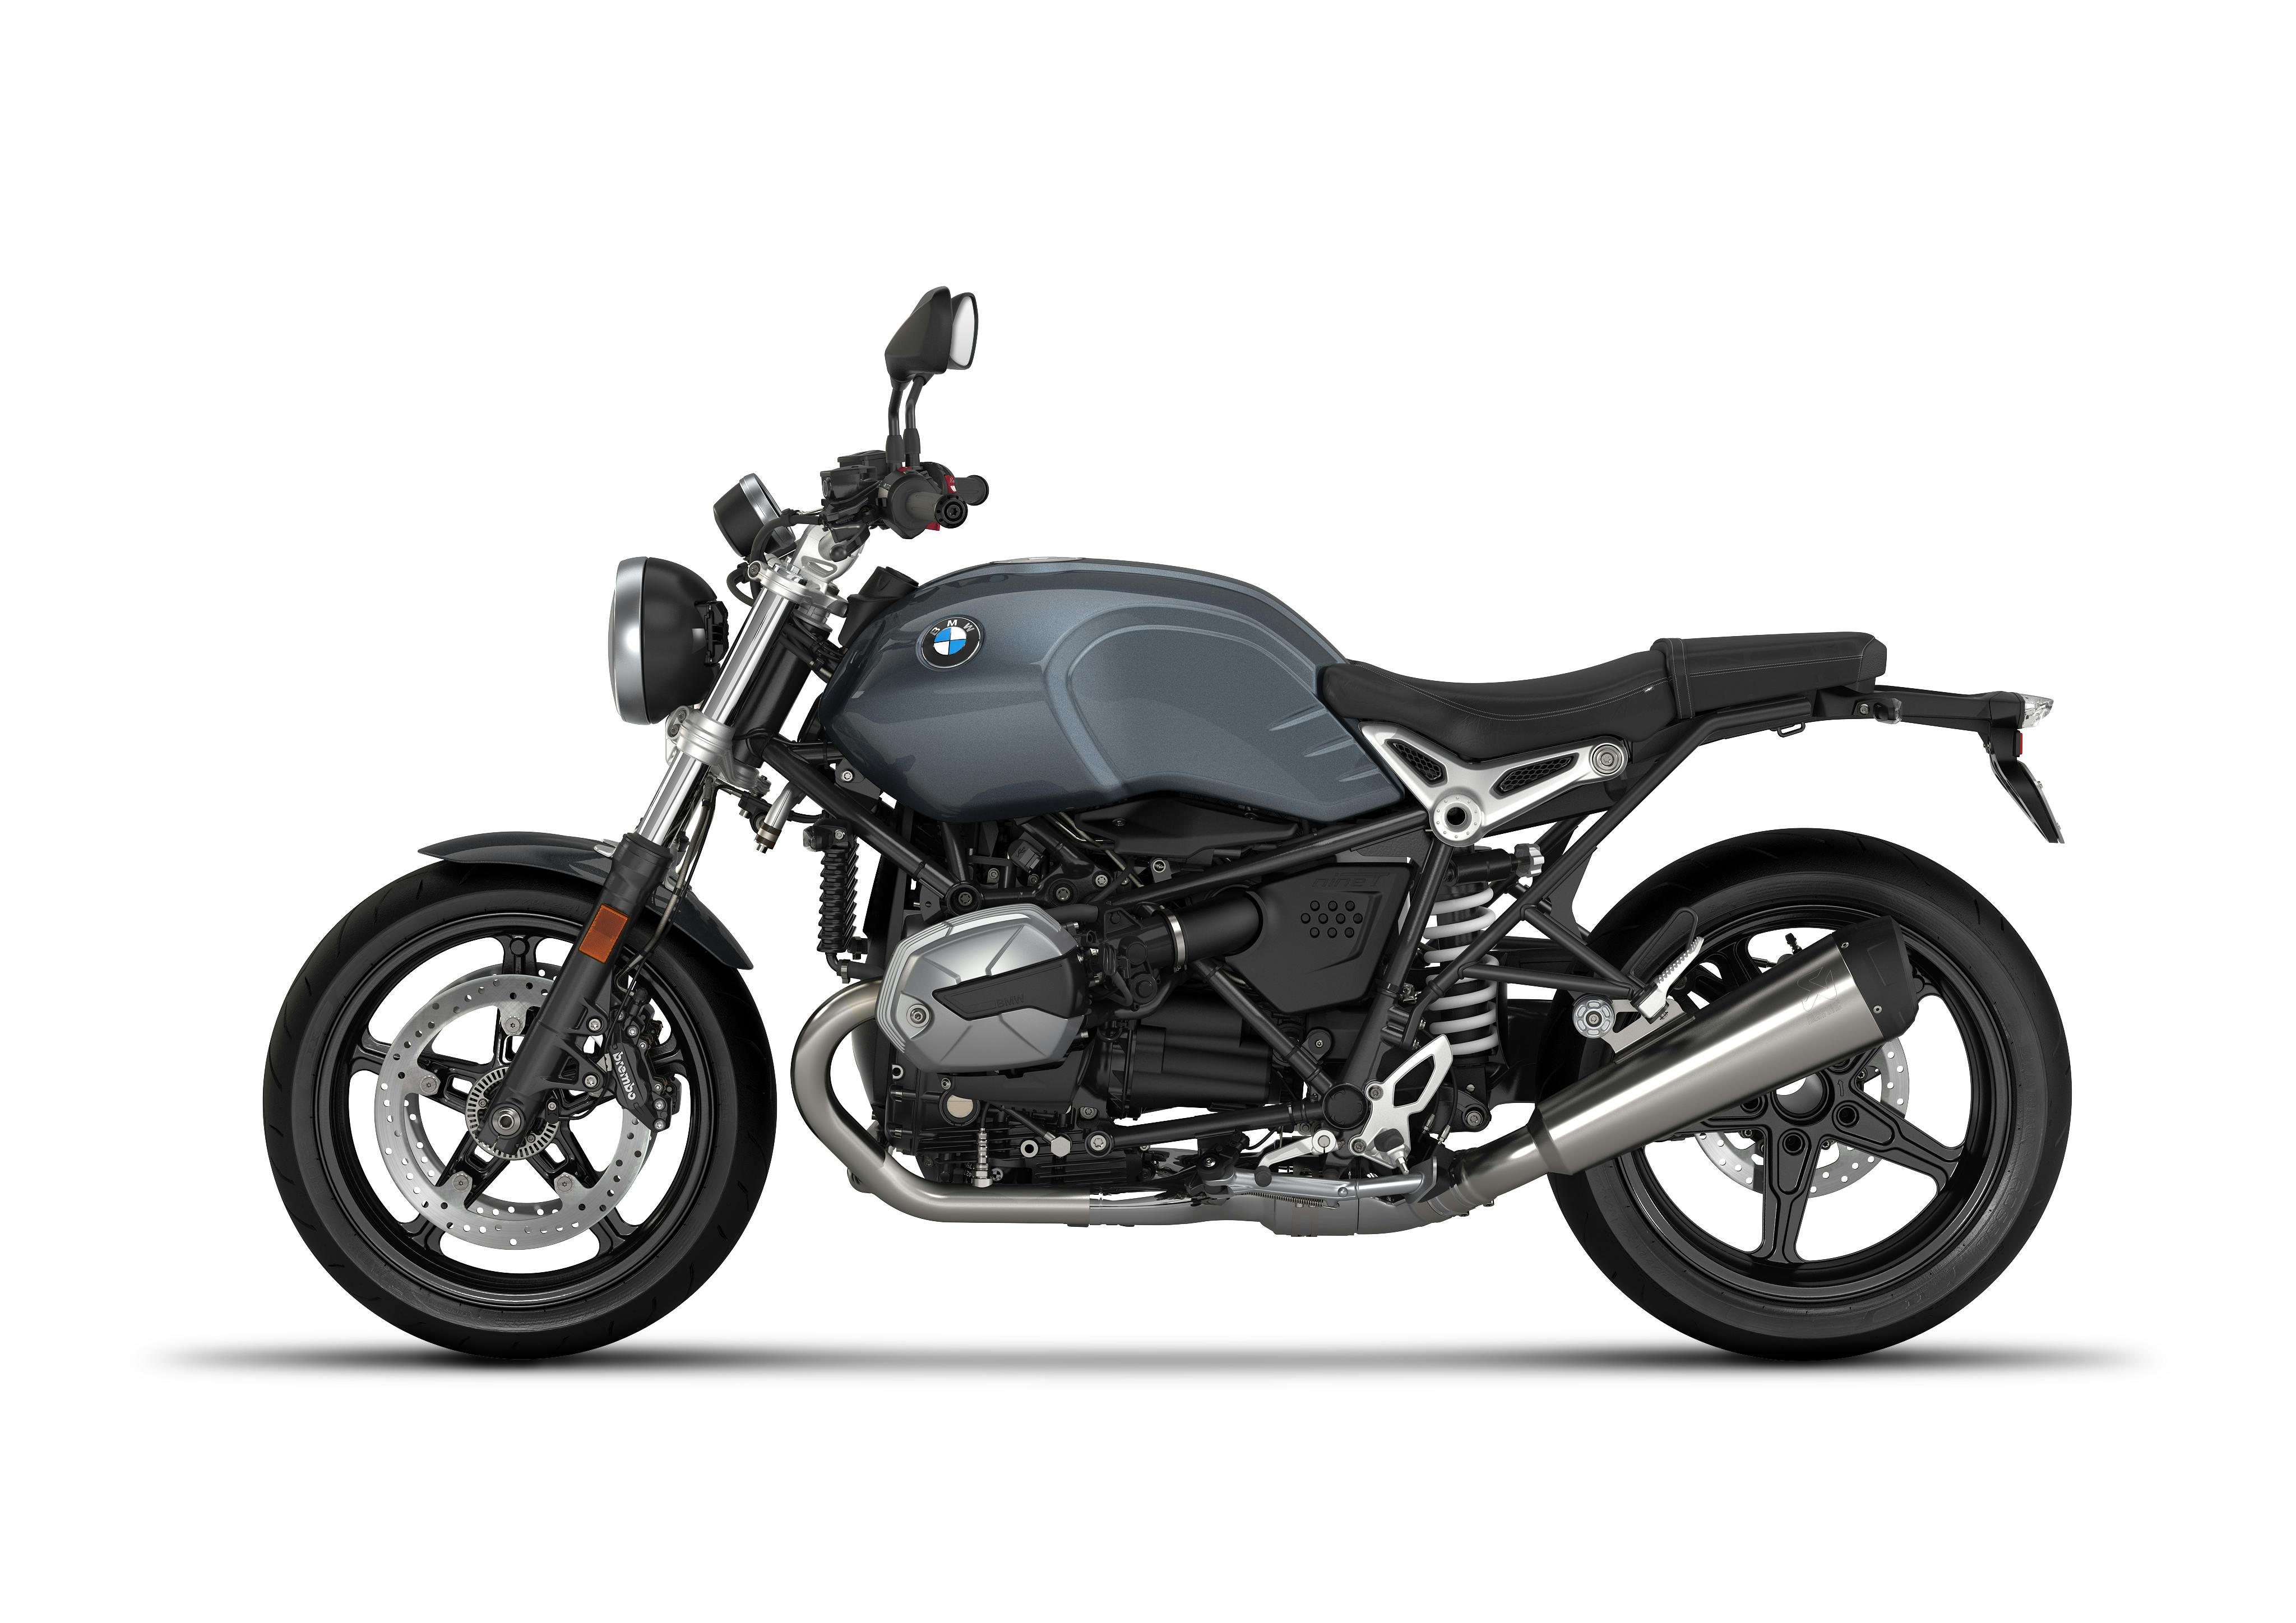 BMW R nineT Pure in Mineral Grey Metallic colour